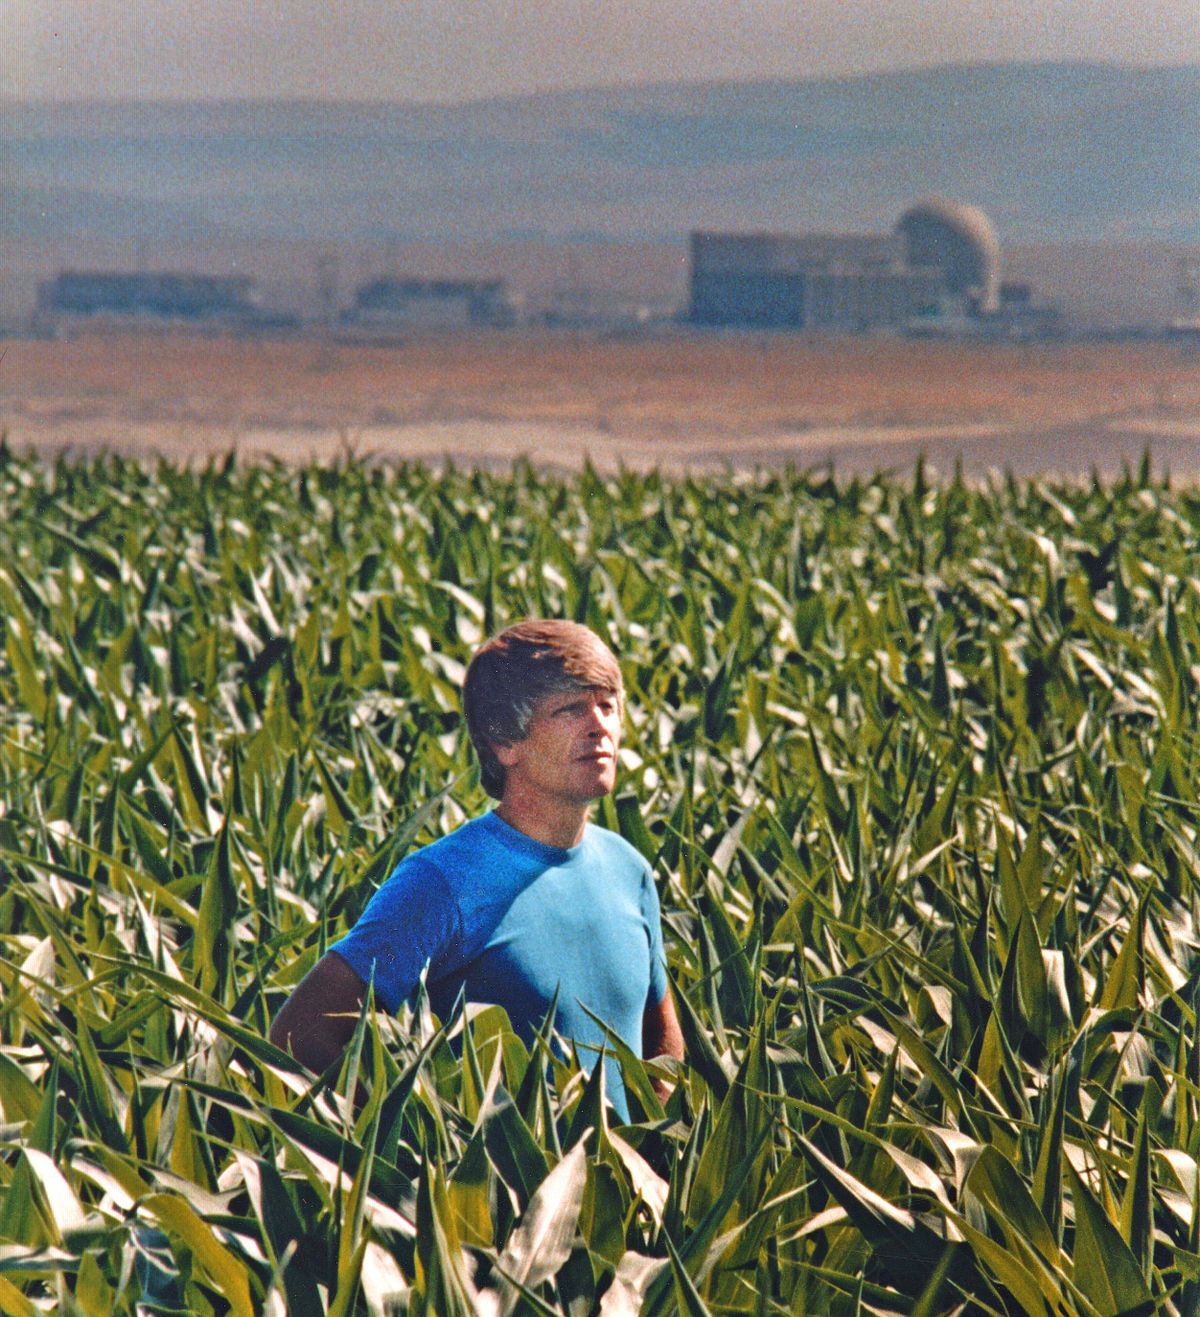 Hanford downwinder Tom Bailie stands in 1985 in one of the many fields that three generations of his family worked going back to the 1940s. In the background is the Hanford Nuclear Reservation.  (Christopher Anderson/The Spokesman-Review)